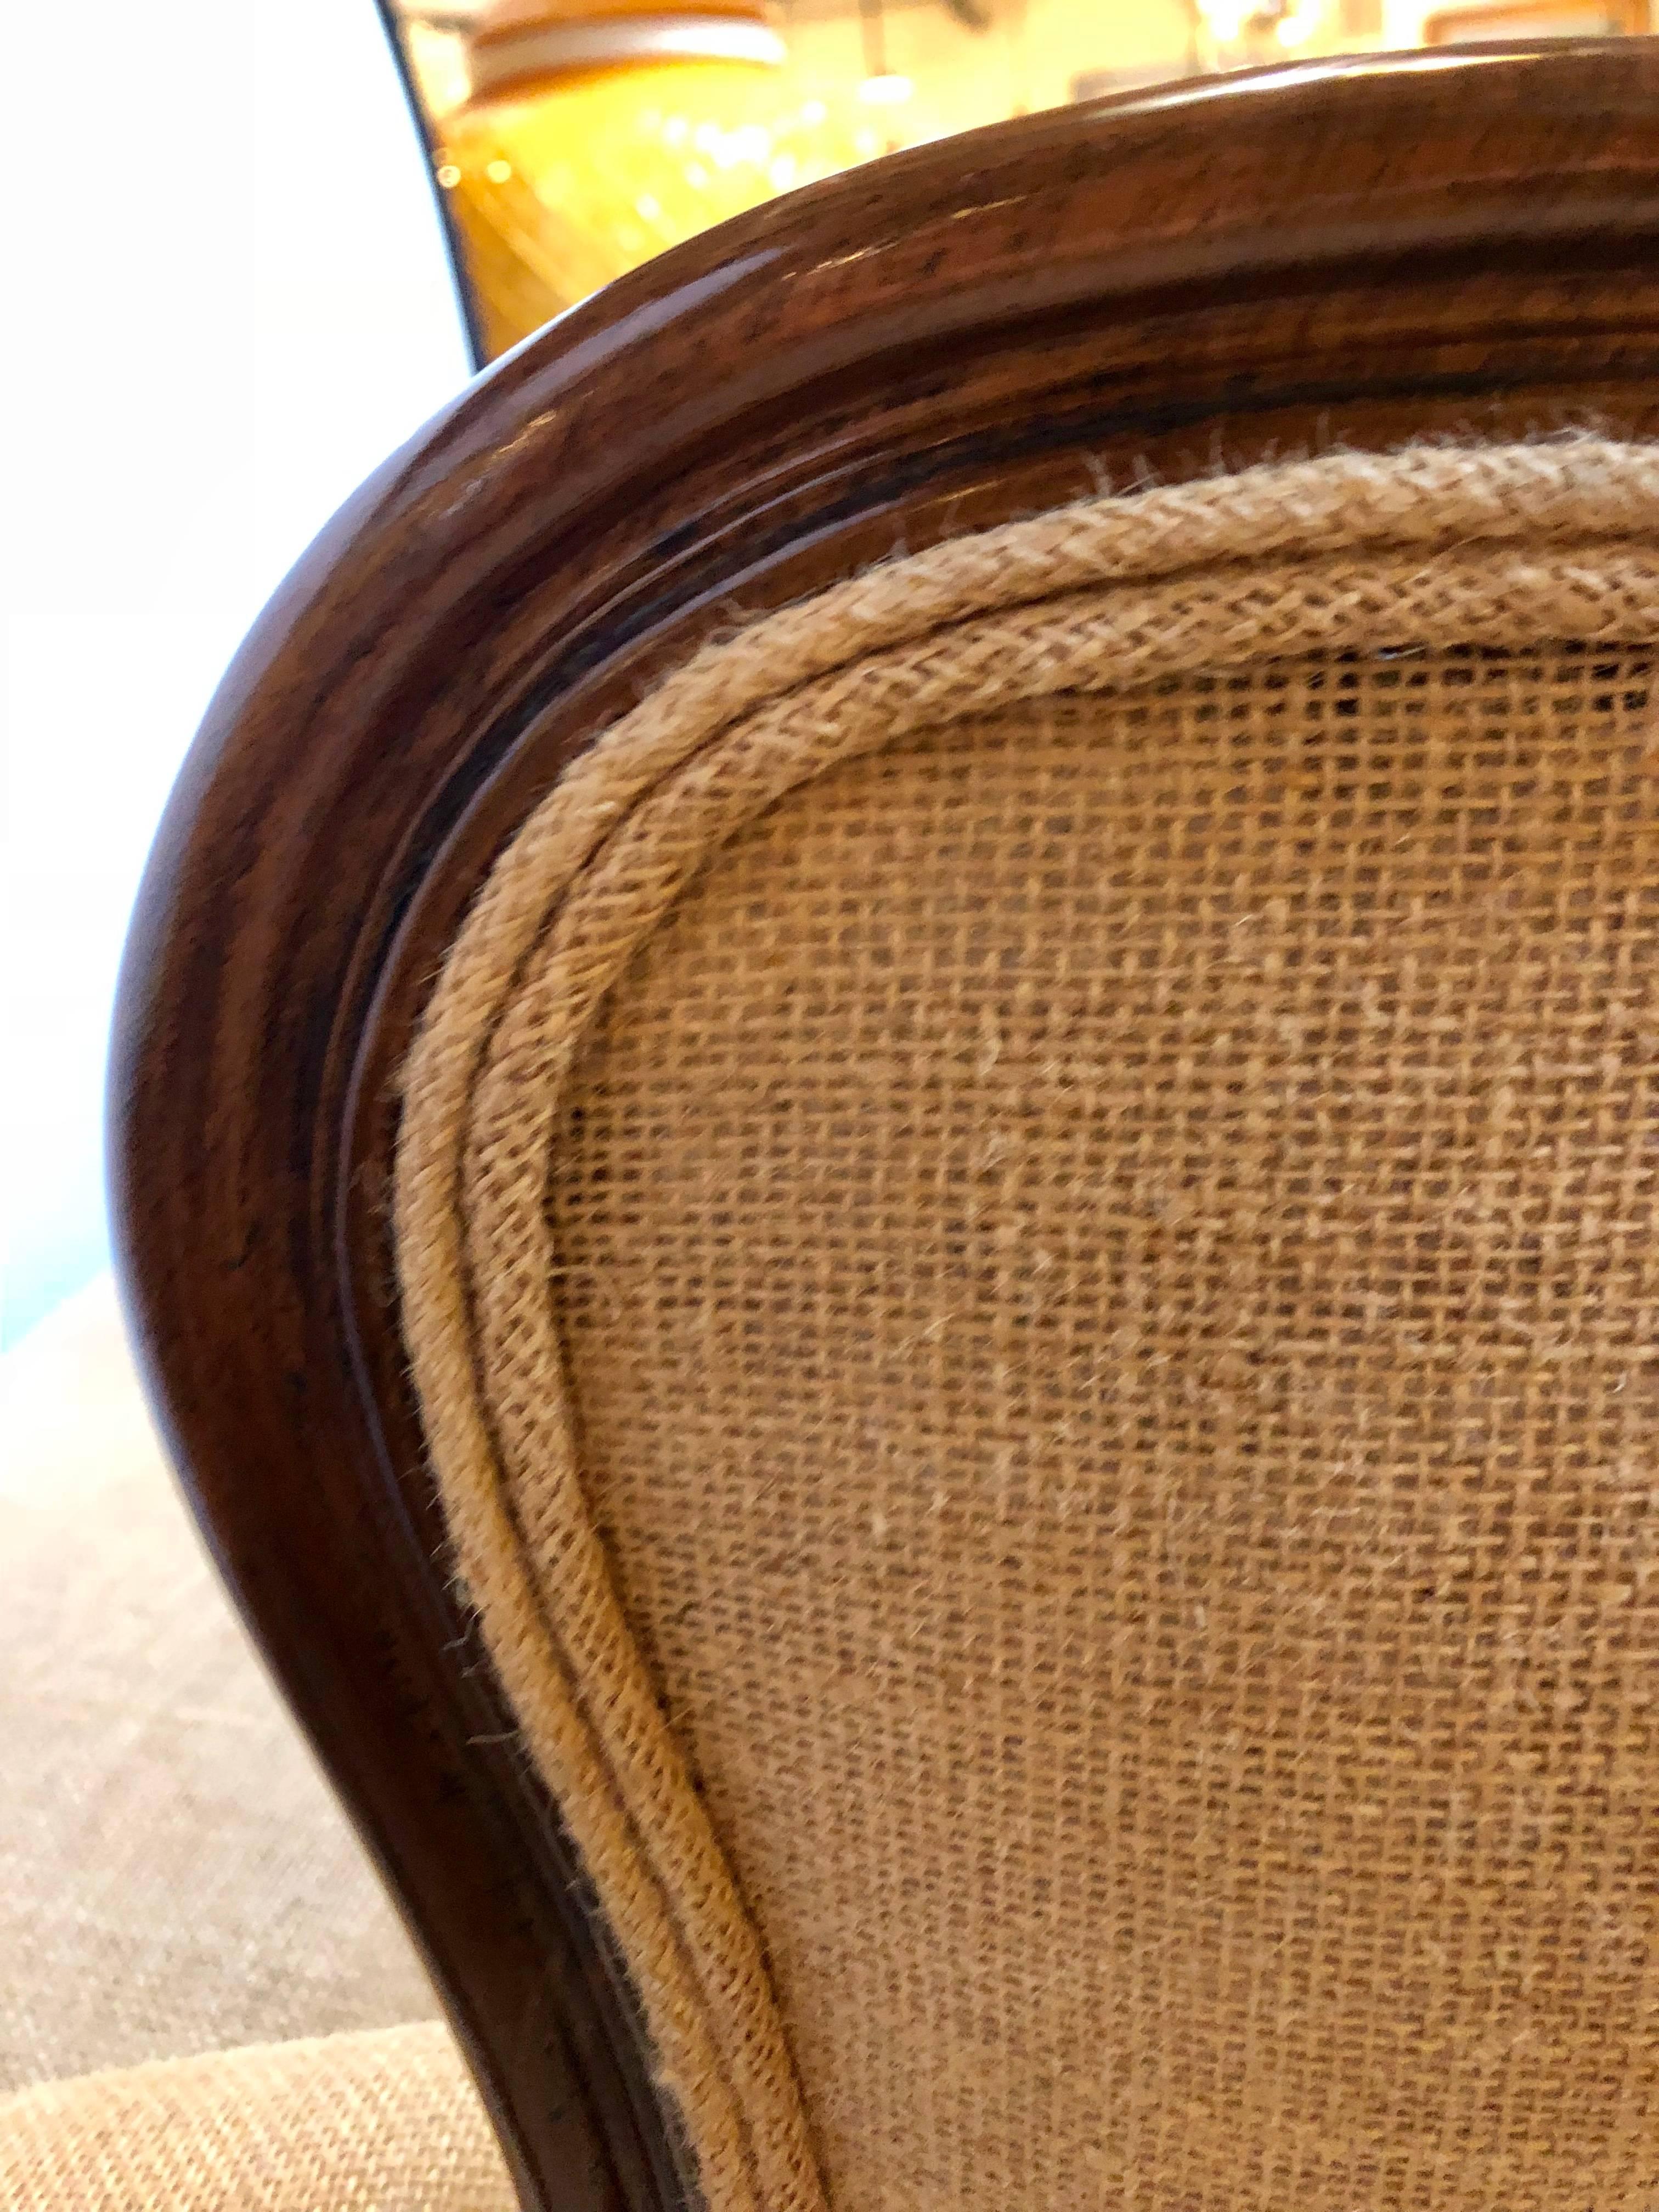 Oversized Wingback Marquis Chair Upholstered in Burlap Carved Wood Details 4